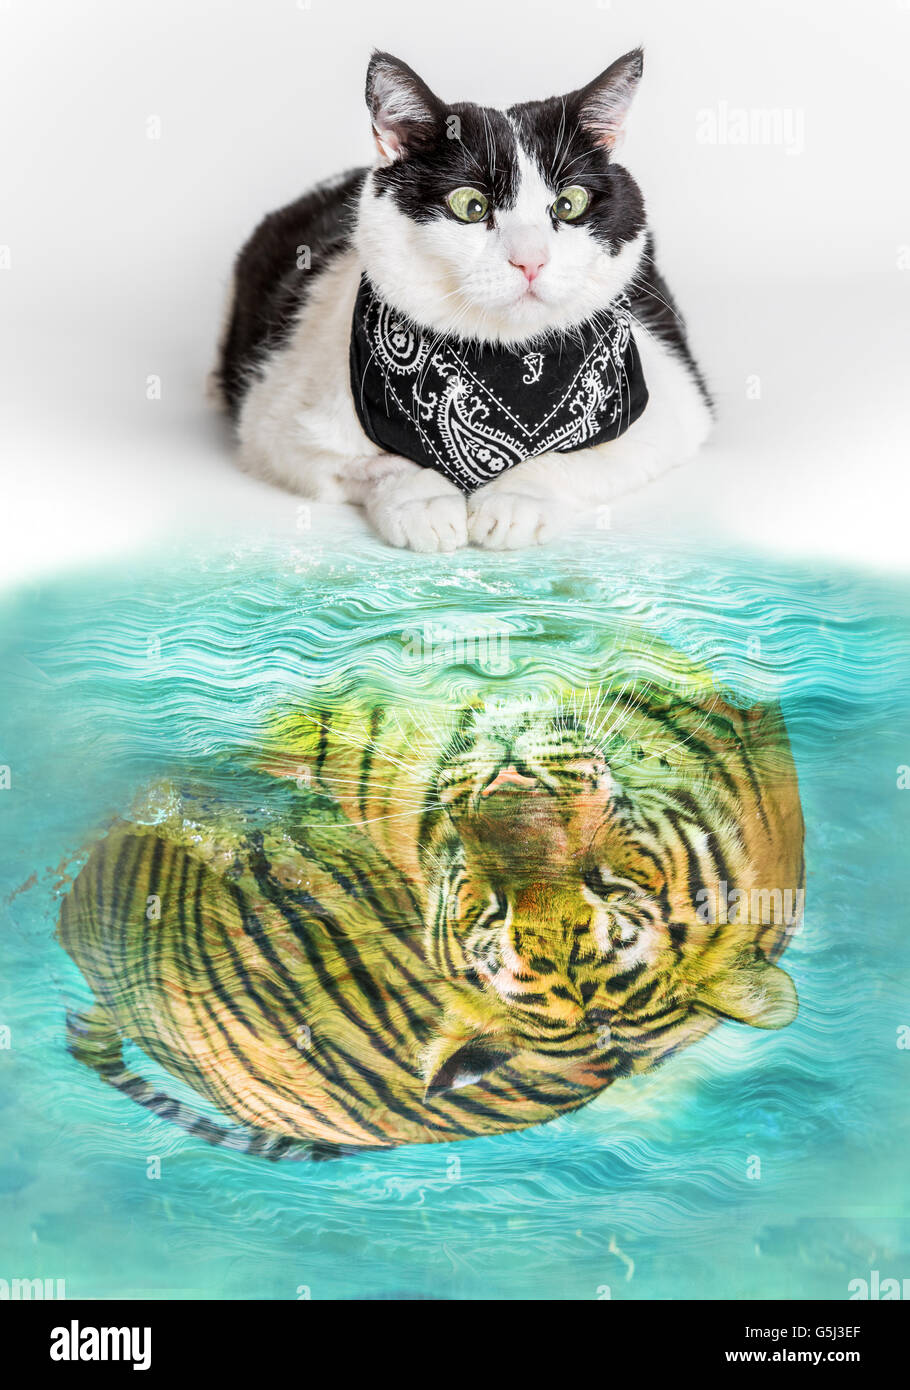 Cat and Tiger Stock Photo